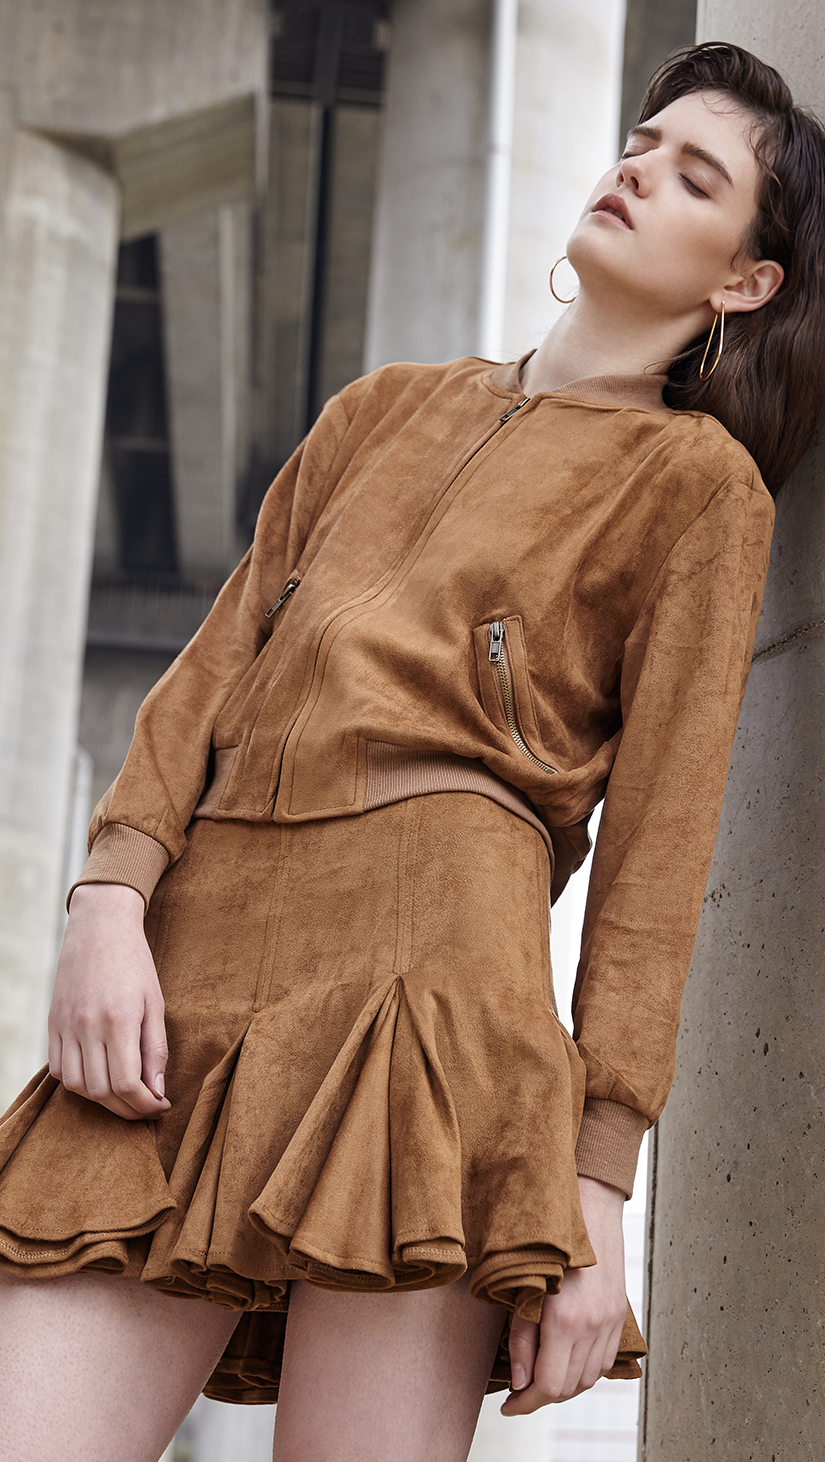 The Meera Suede Set in camel jacket and skirt. Jacket has a single zip closure at front, side pockets with zipped opening, no collars. Skirt has a flared hem with back zip closure. Lightweight. Slim fit.